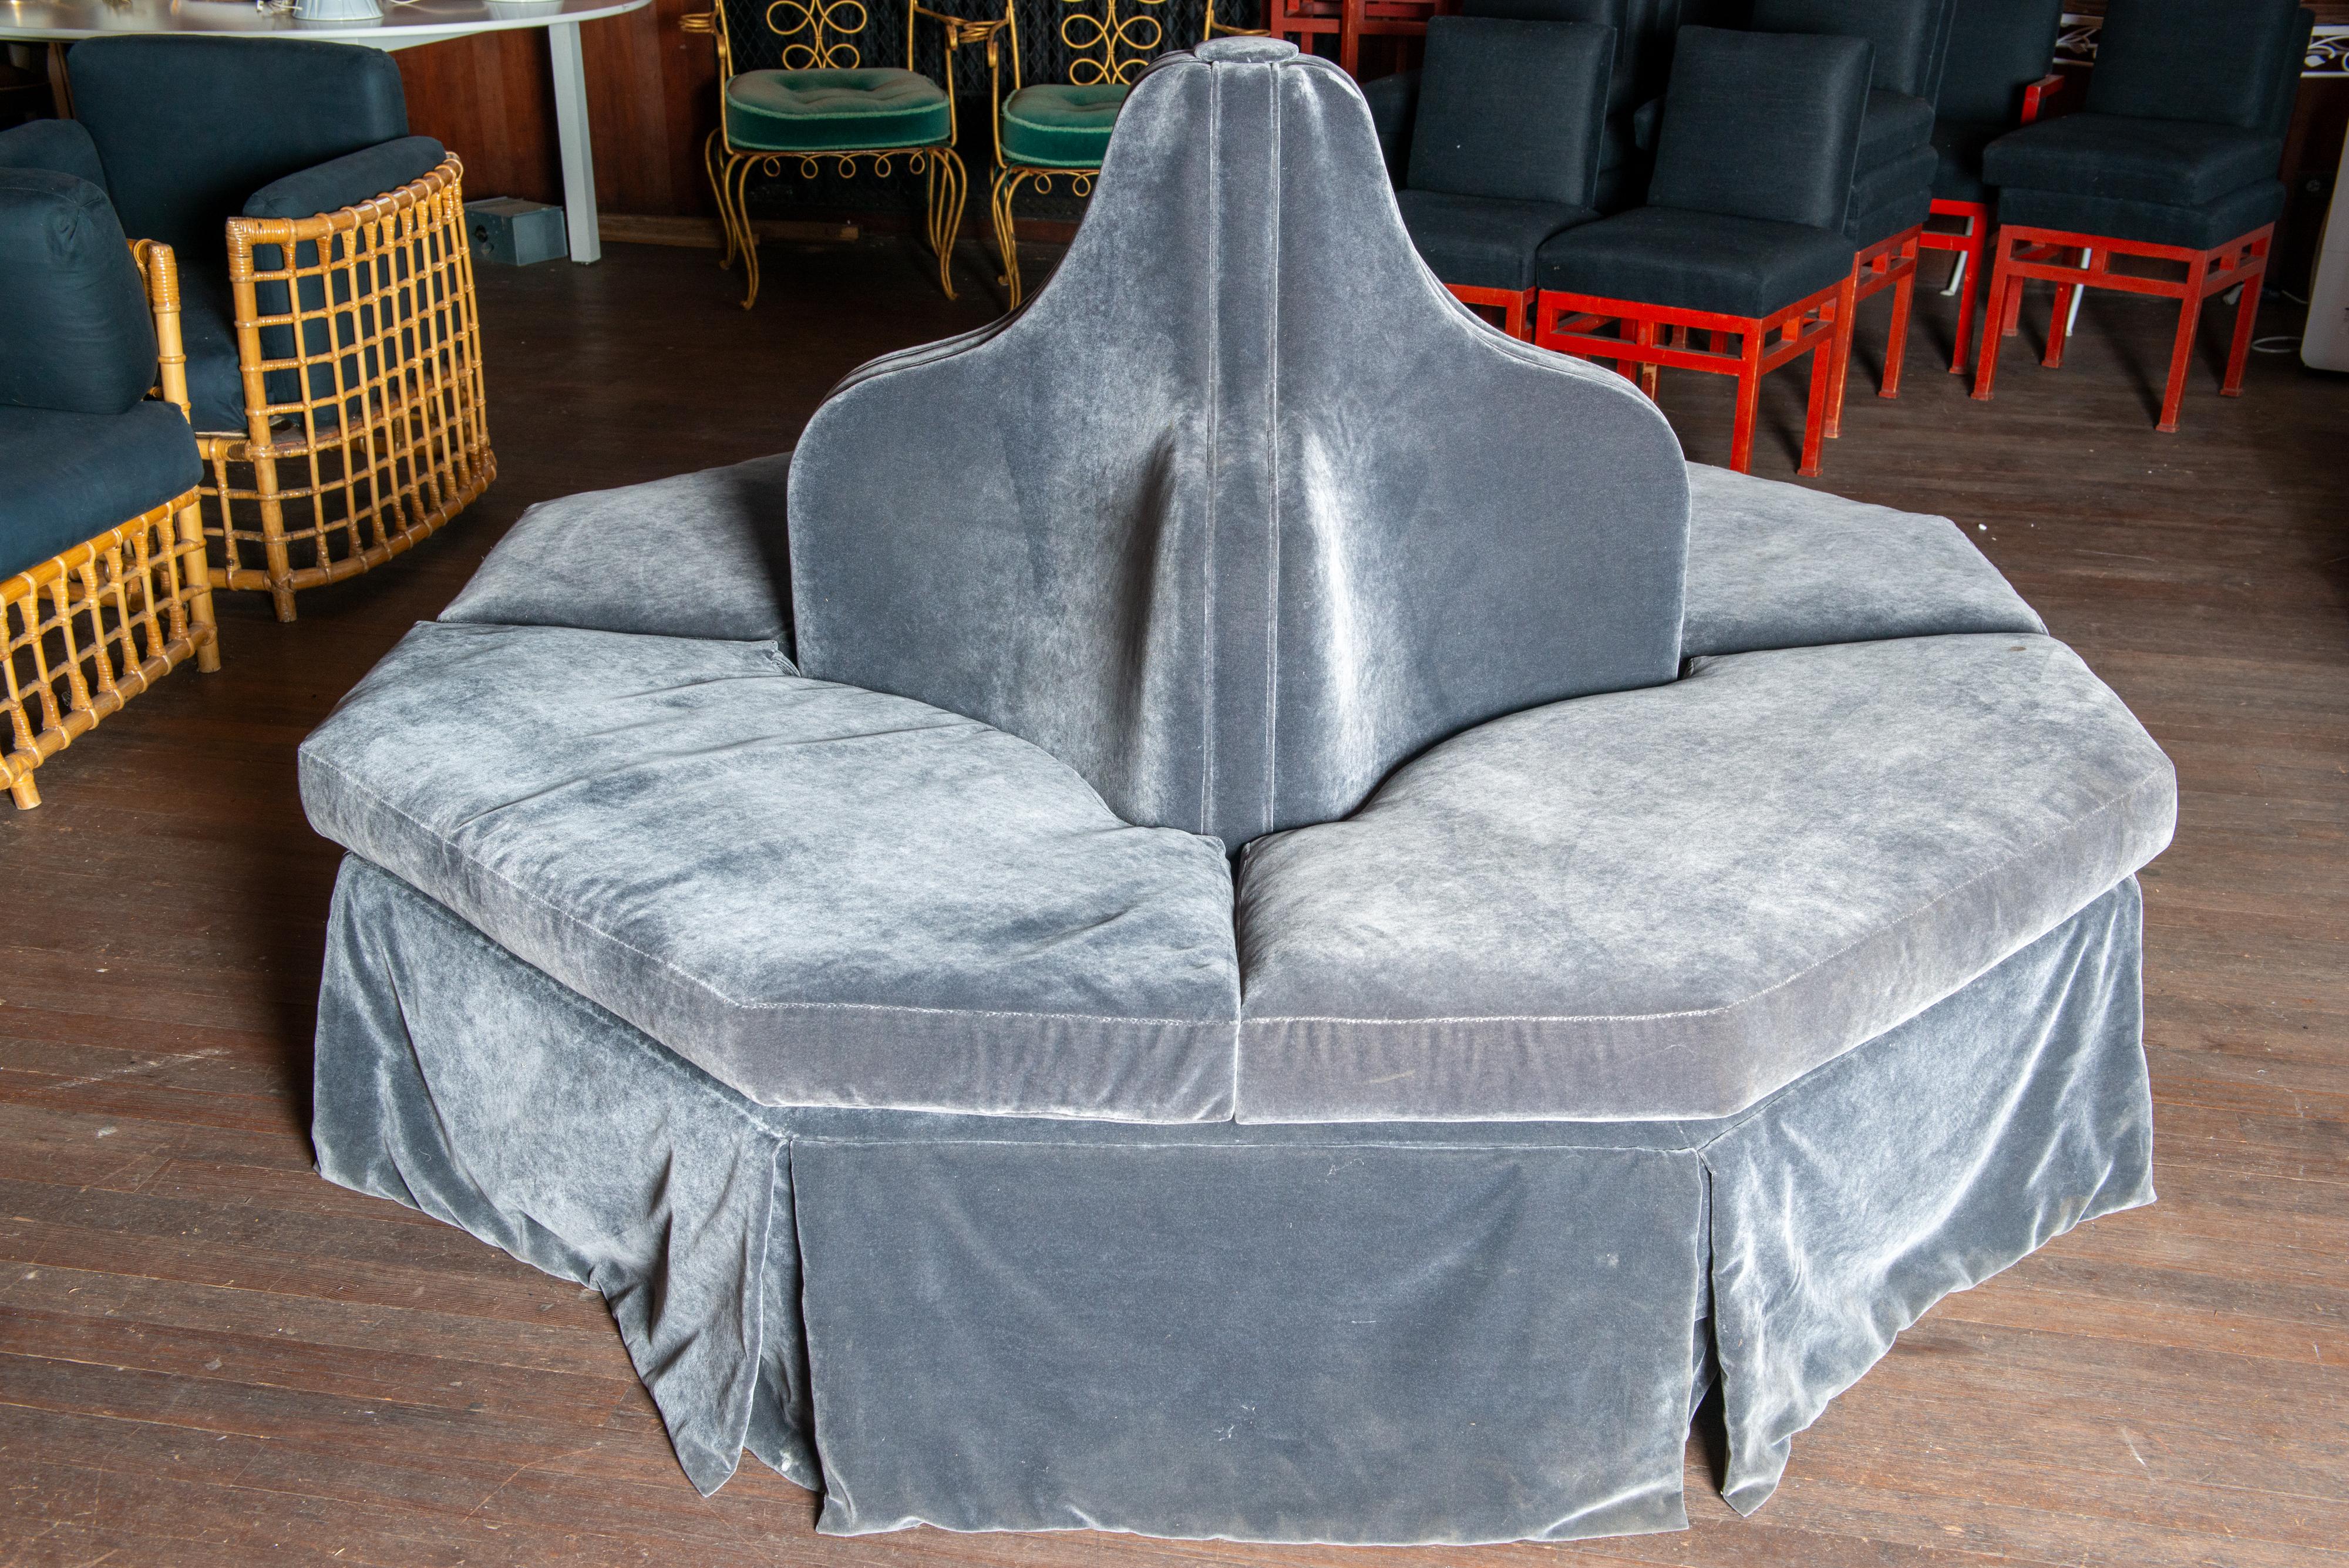 A stunning dark grey velvet four section custom made bourne. The base is hexagonal in shape with a luxurious inverted pleated flat valance. Four shaped and curved back supports create a dramatic sculptural profile.
This piece is made by Century